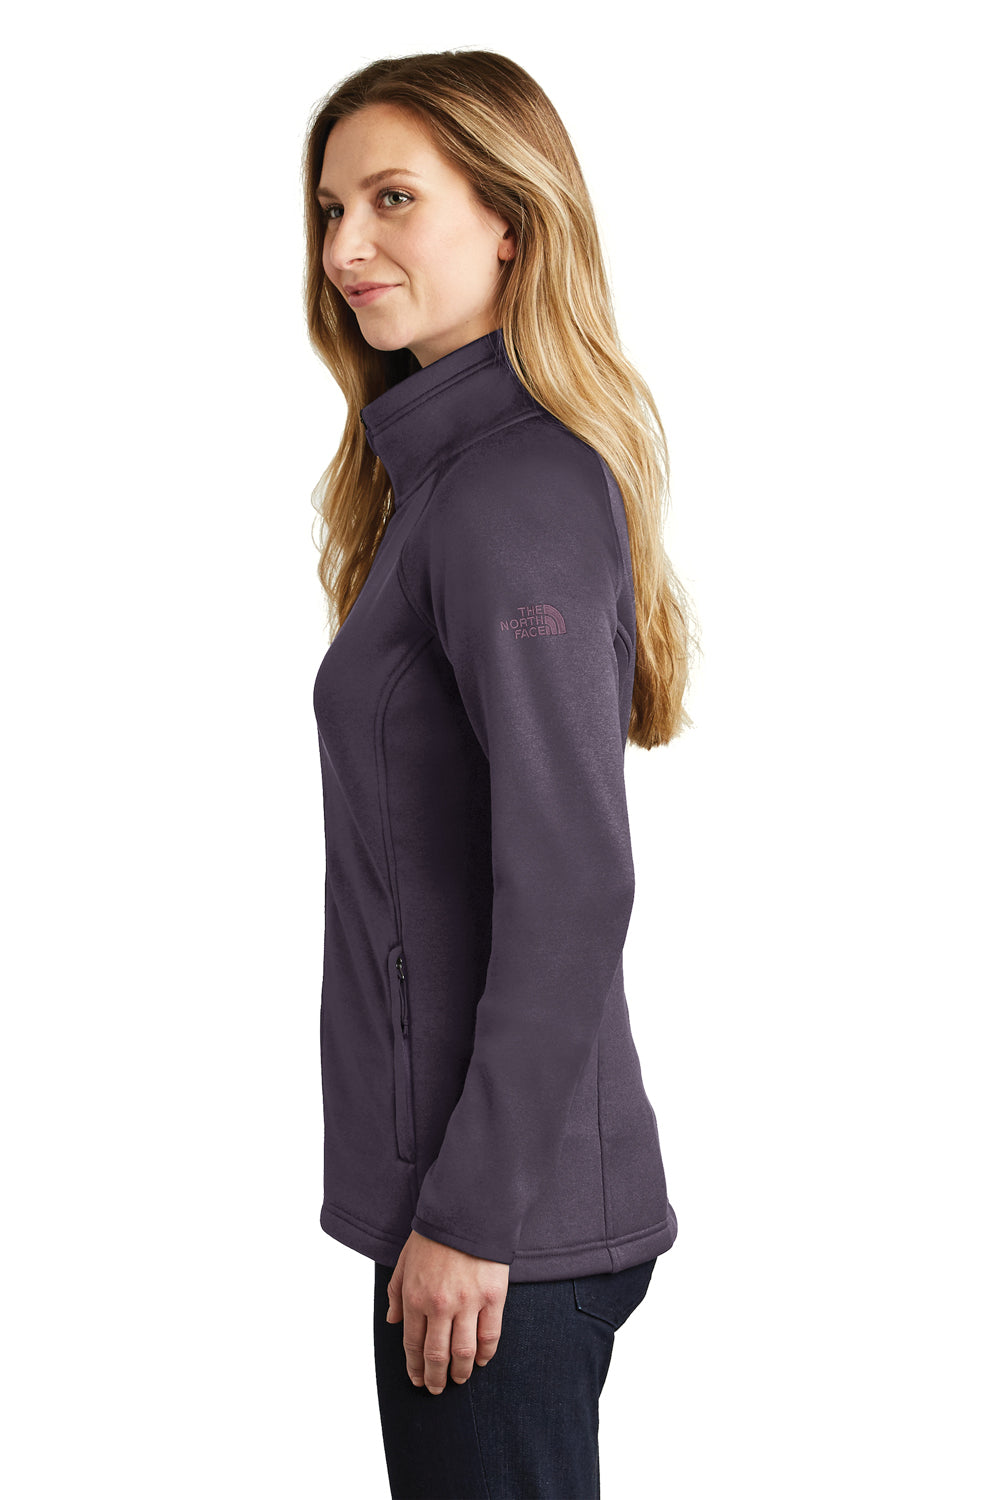 The North Face NF0A3LHA Womens Canyon Flats Full Zip Fleece Jacket Heather Eggplant Purple Side